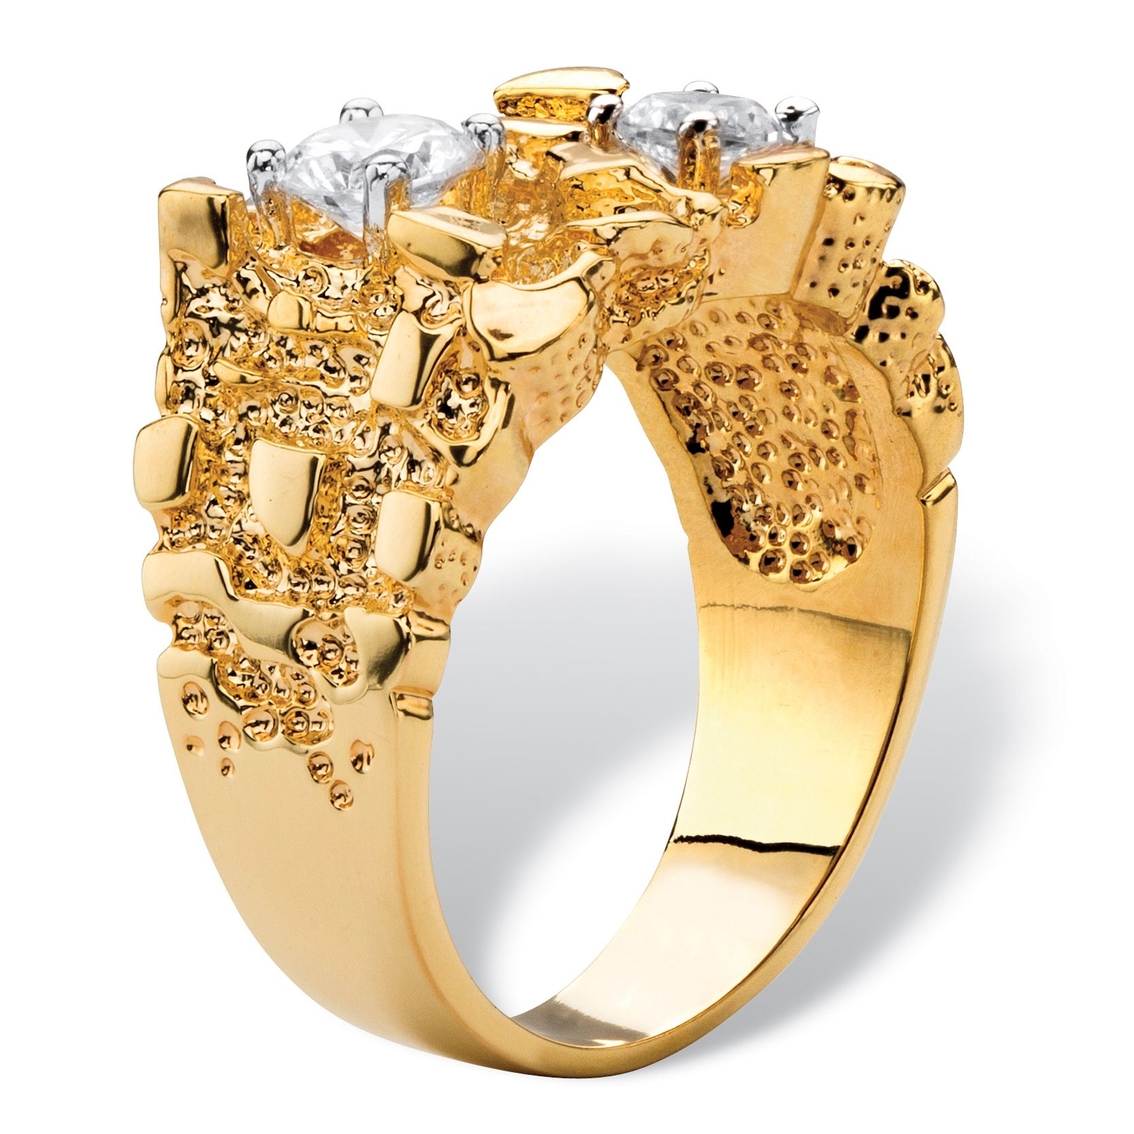 Men's 1.05 TCW Round Cubic Zirconia Nugget Ring Gold-Plated - Image 2 of 5